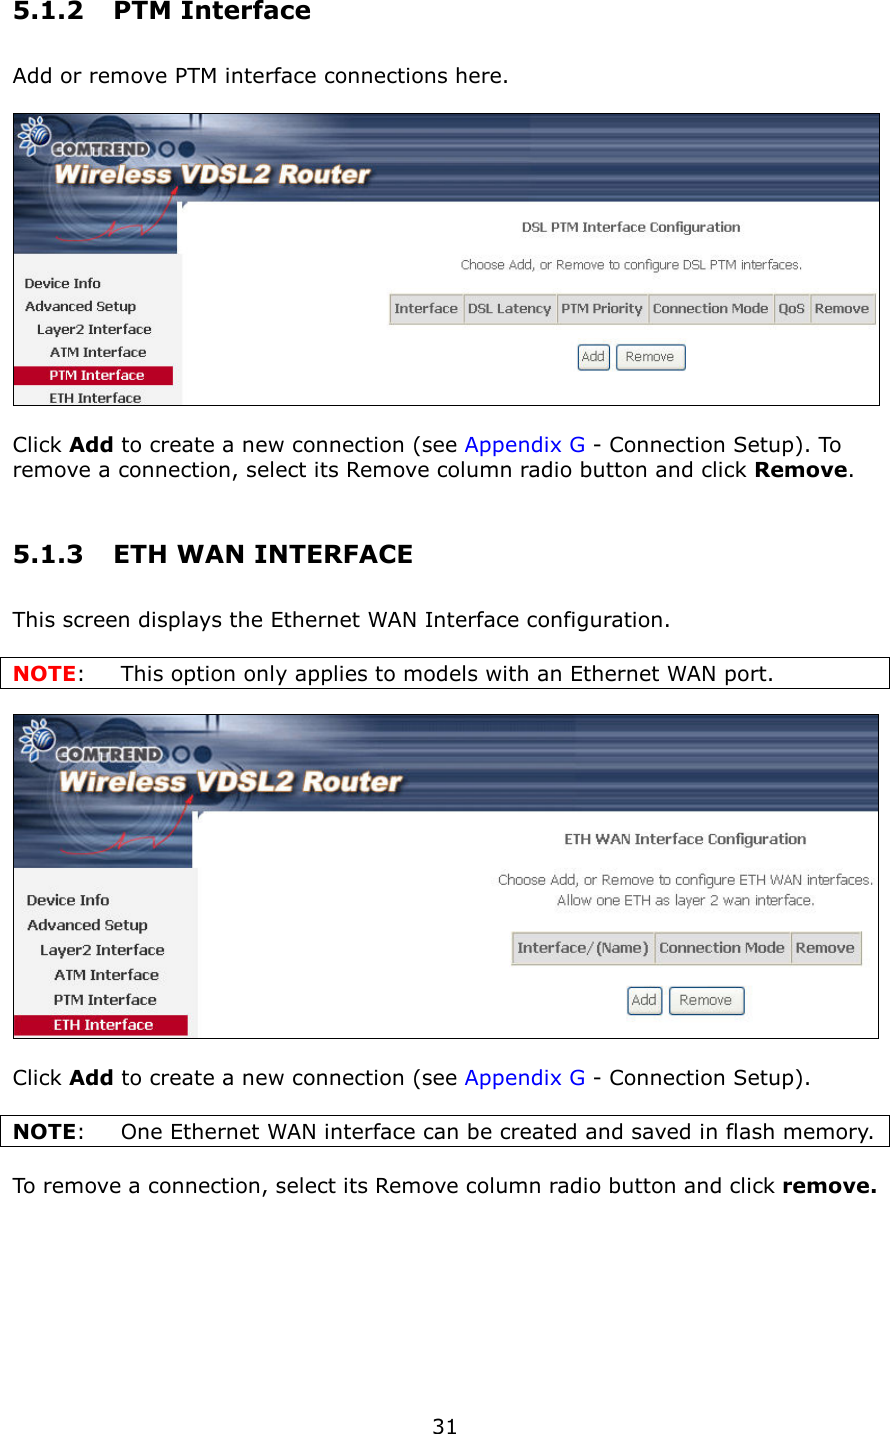   31 5.1.2  PTM Interface Add or remove PTM interface connections here.        Click Add to create a new connection (see Appendix G - Connection Setup). To remove a connection, select its Remove column radio button and click Remove. 5.1.3  ETH WAN INTERFACE This screen displays the Ethernet WAN Interface configuration.    NOTE:  This option only applies to models with an Ethernet WAN port.    Click Add to create a new connection (see Appendix G - Connection Setup).  NOTE:  One Ethernet WAN interface can be created and saved in flash memory.      To remove a connection, select its Remove column radio button and click remove. 